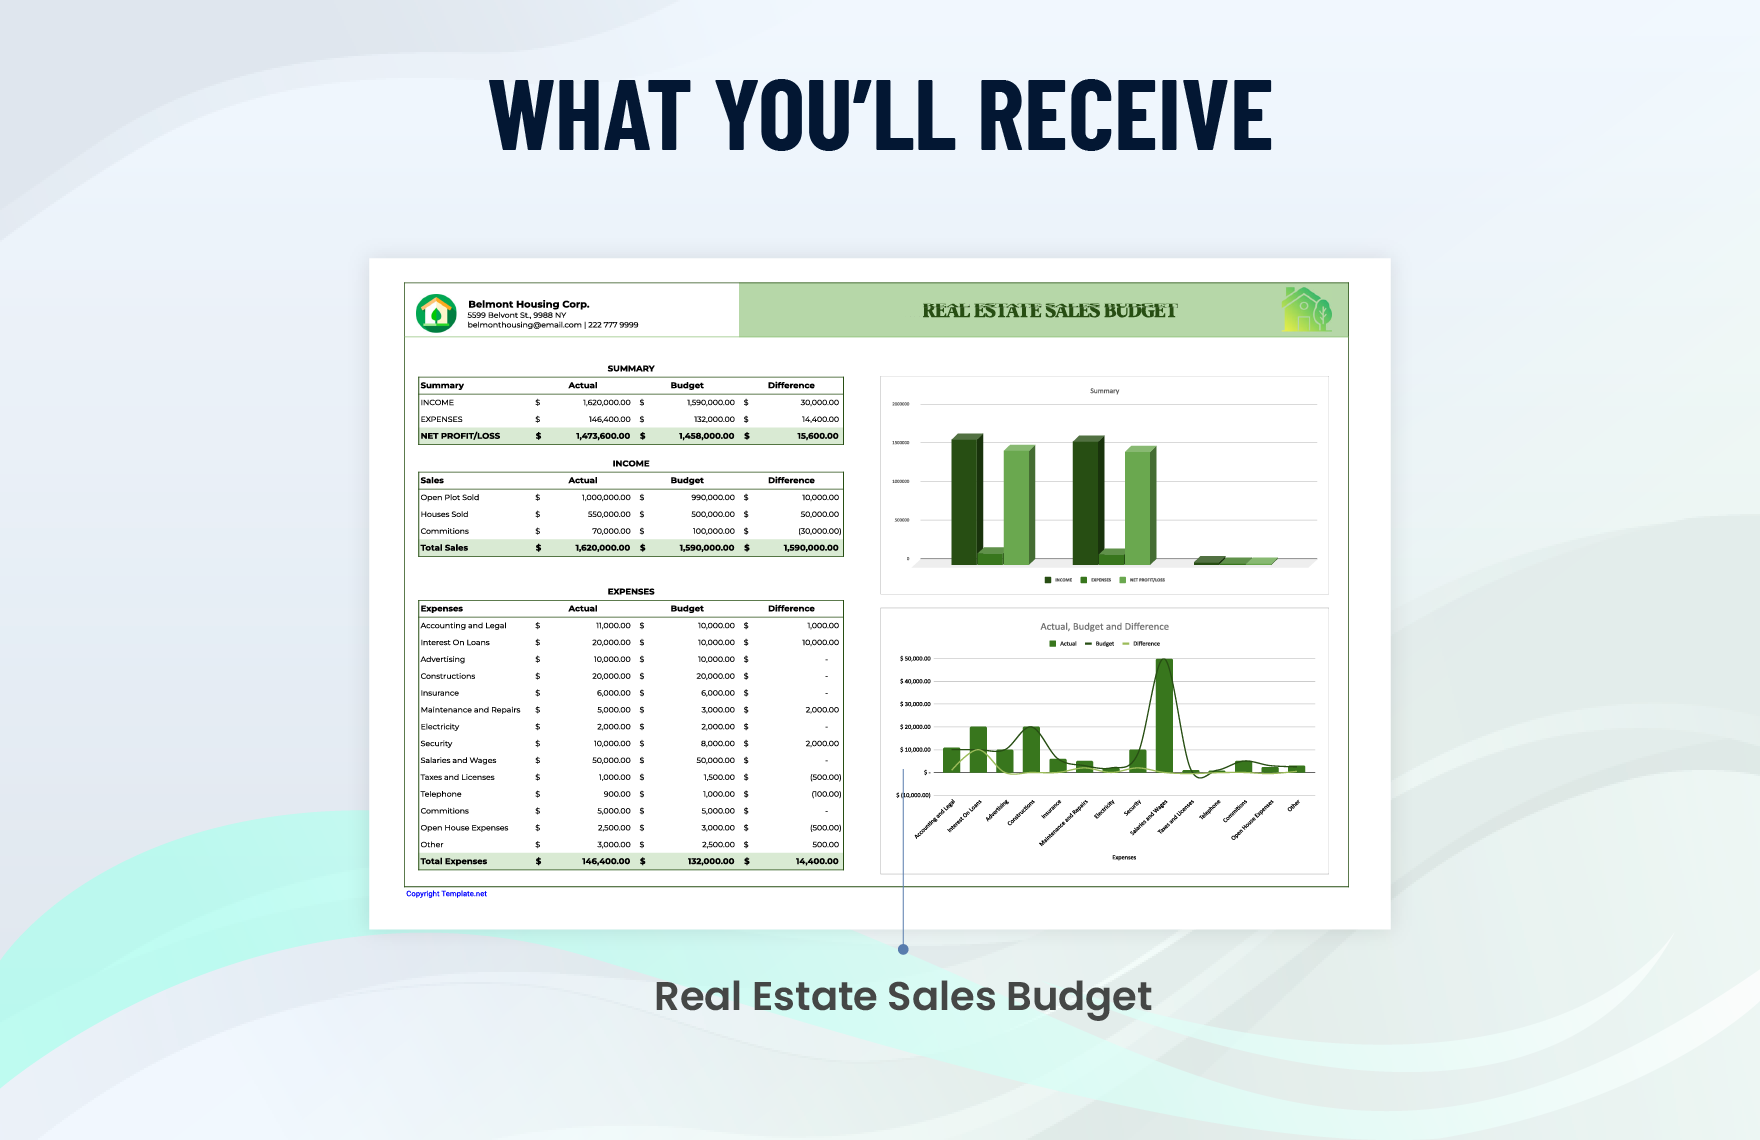 Real Estate Sales Budget Template